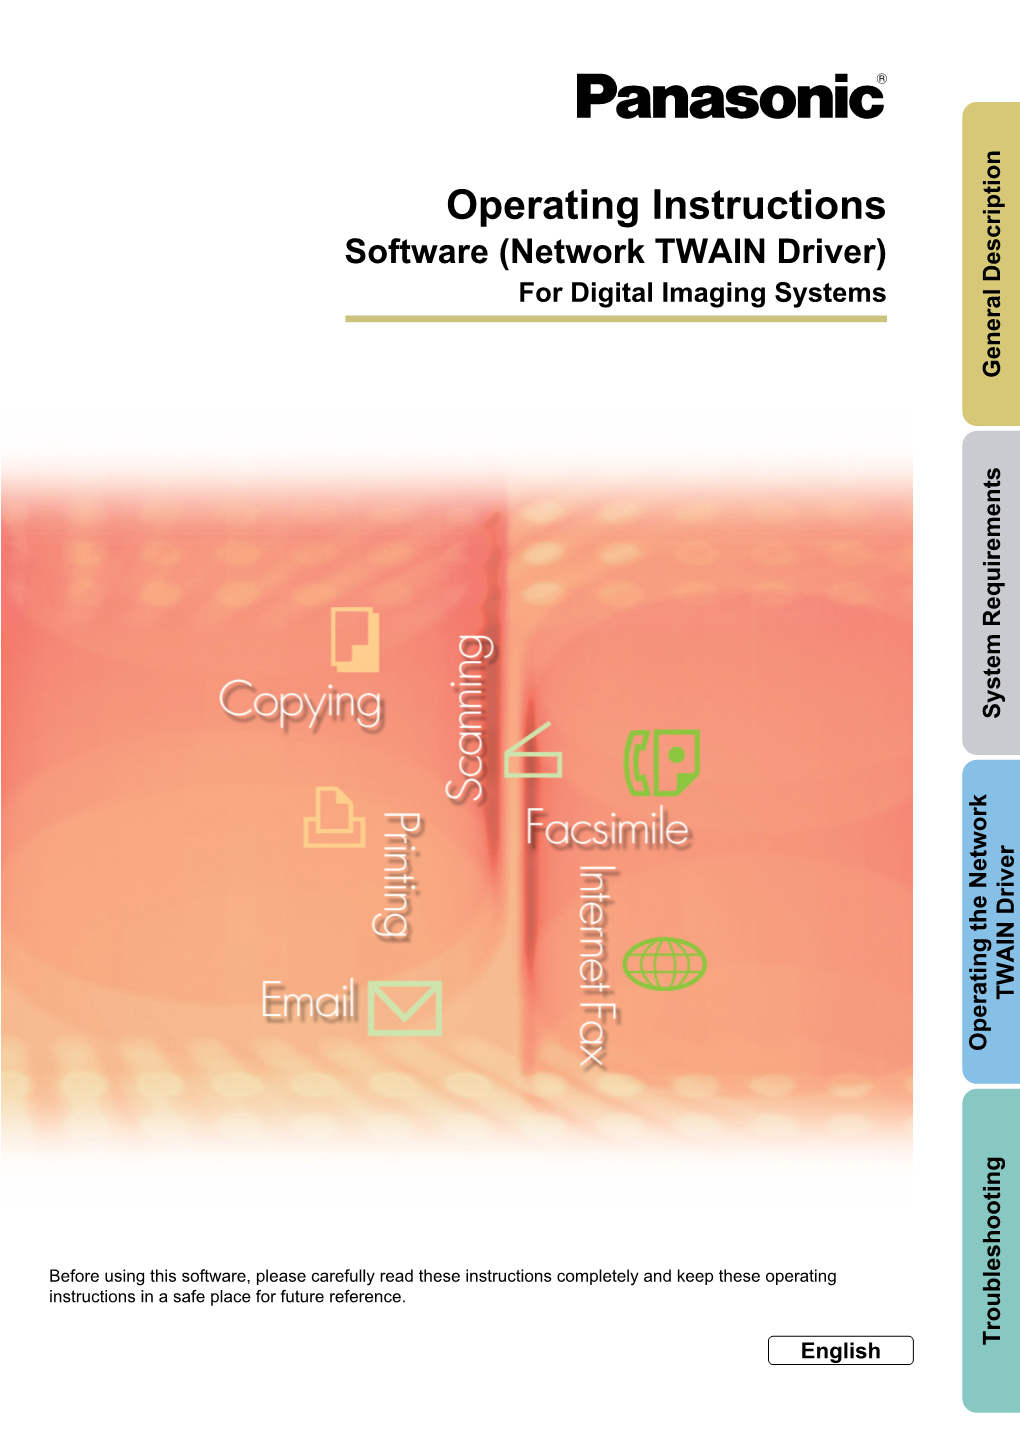 Operating Instructions Software (Network TWAIN Driver) for Digital Imaging Systems General Description System Requirements TWAIN Driver Operating the Network